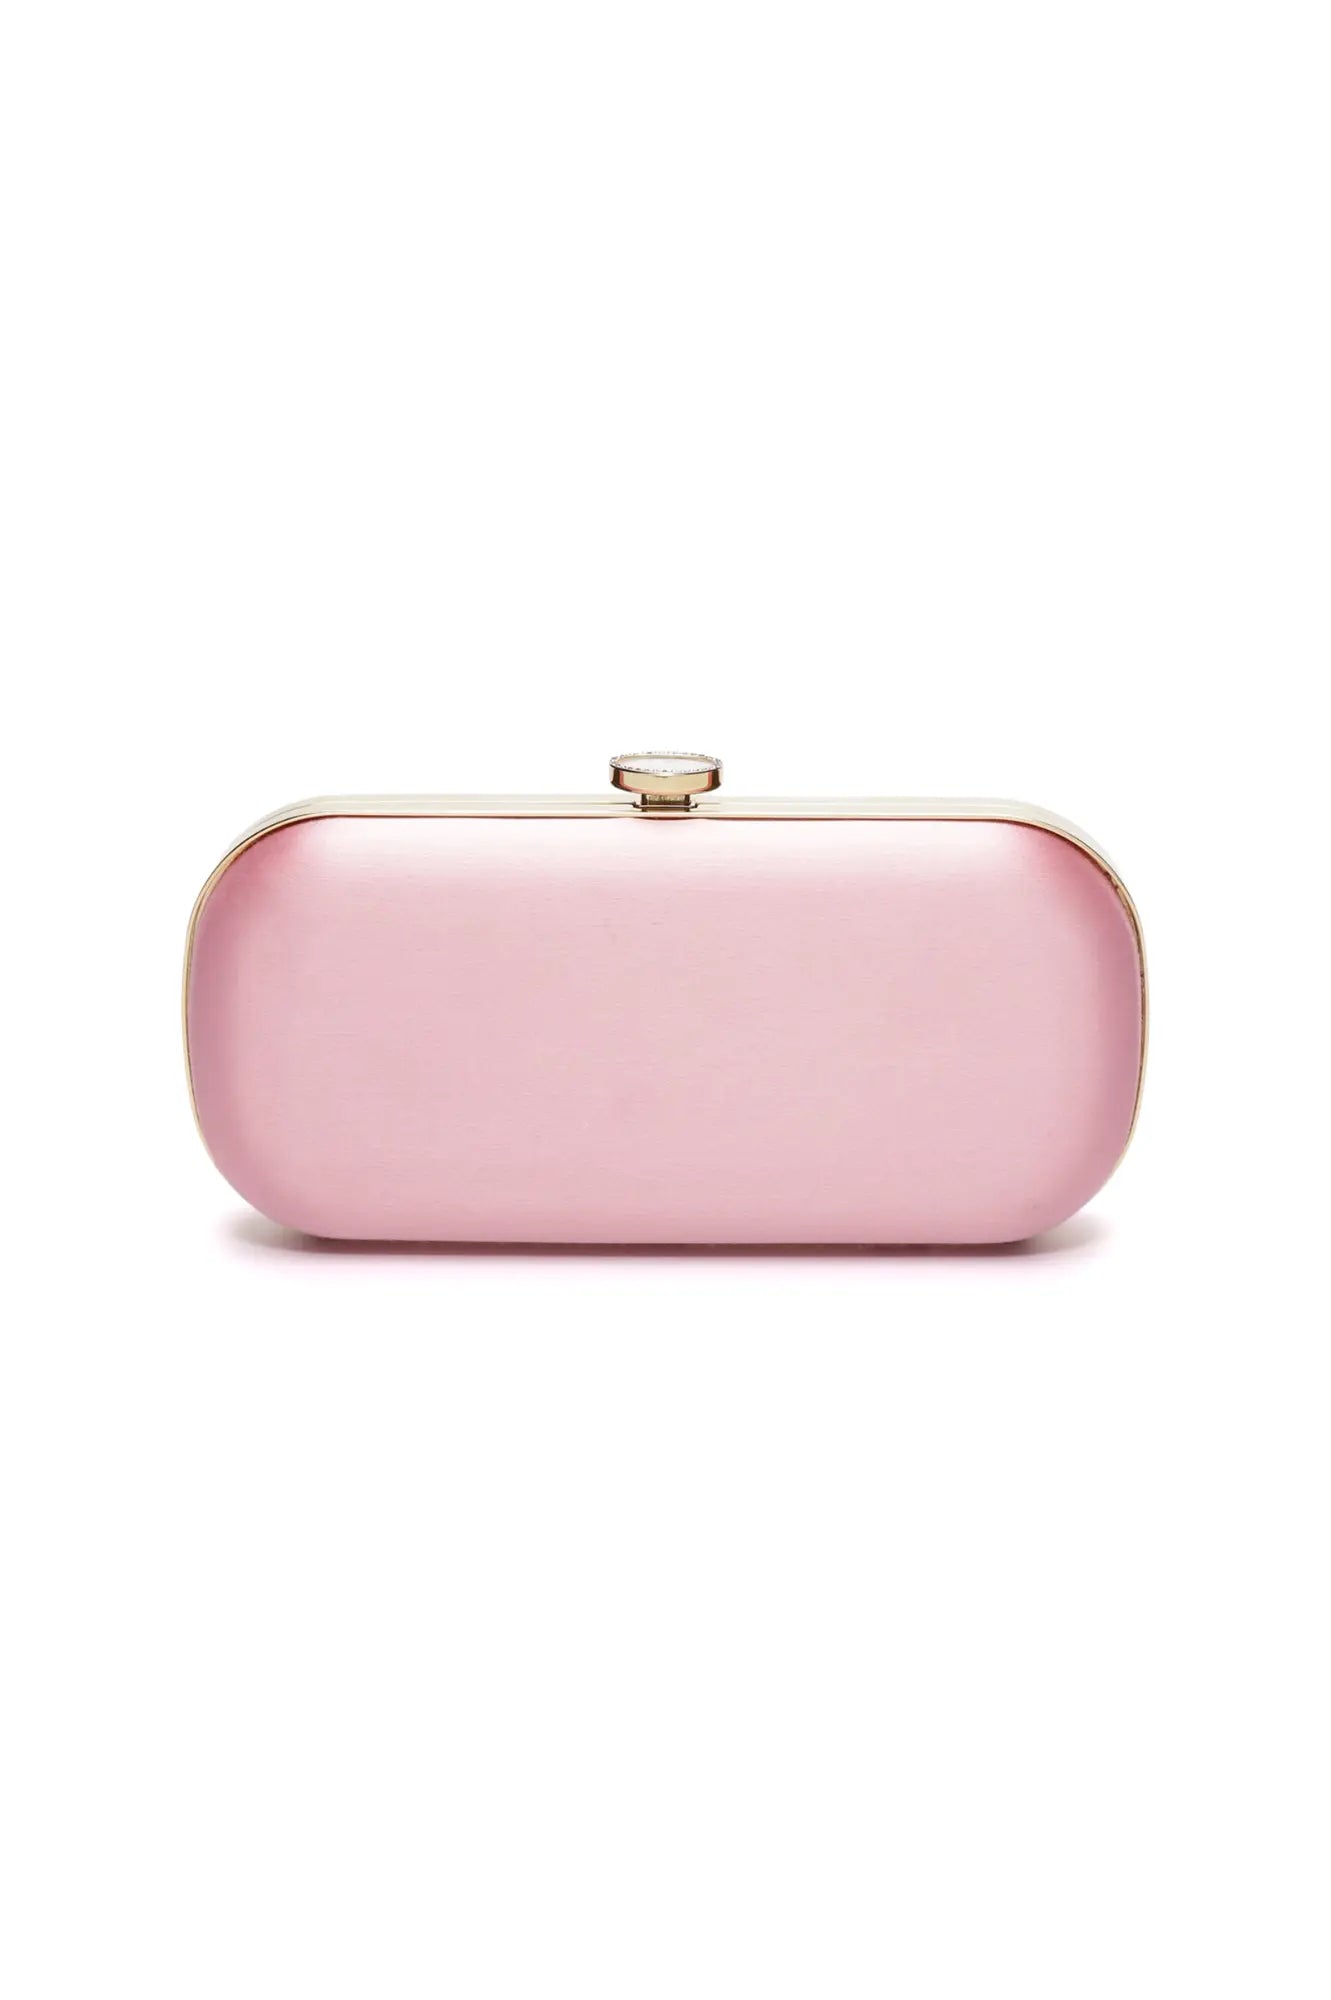 A pink duchess satin Bella Clutch Pink Grande from The Bella Rosa Collection isolated on a white background.